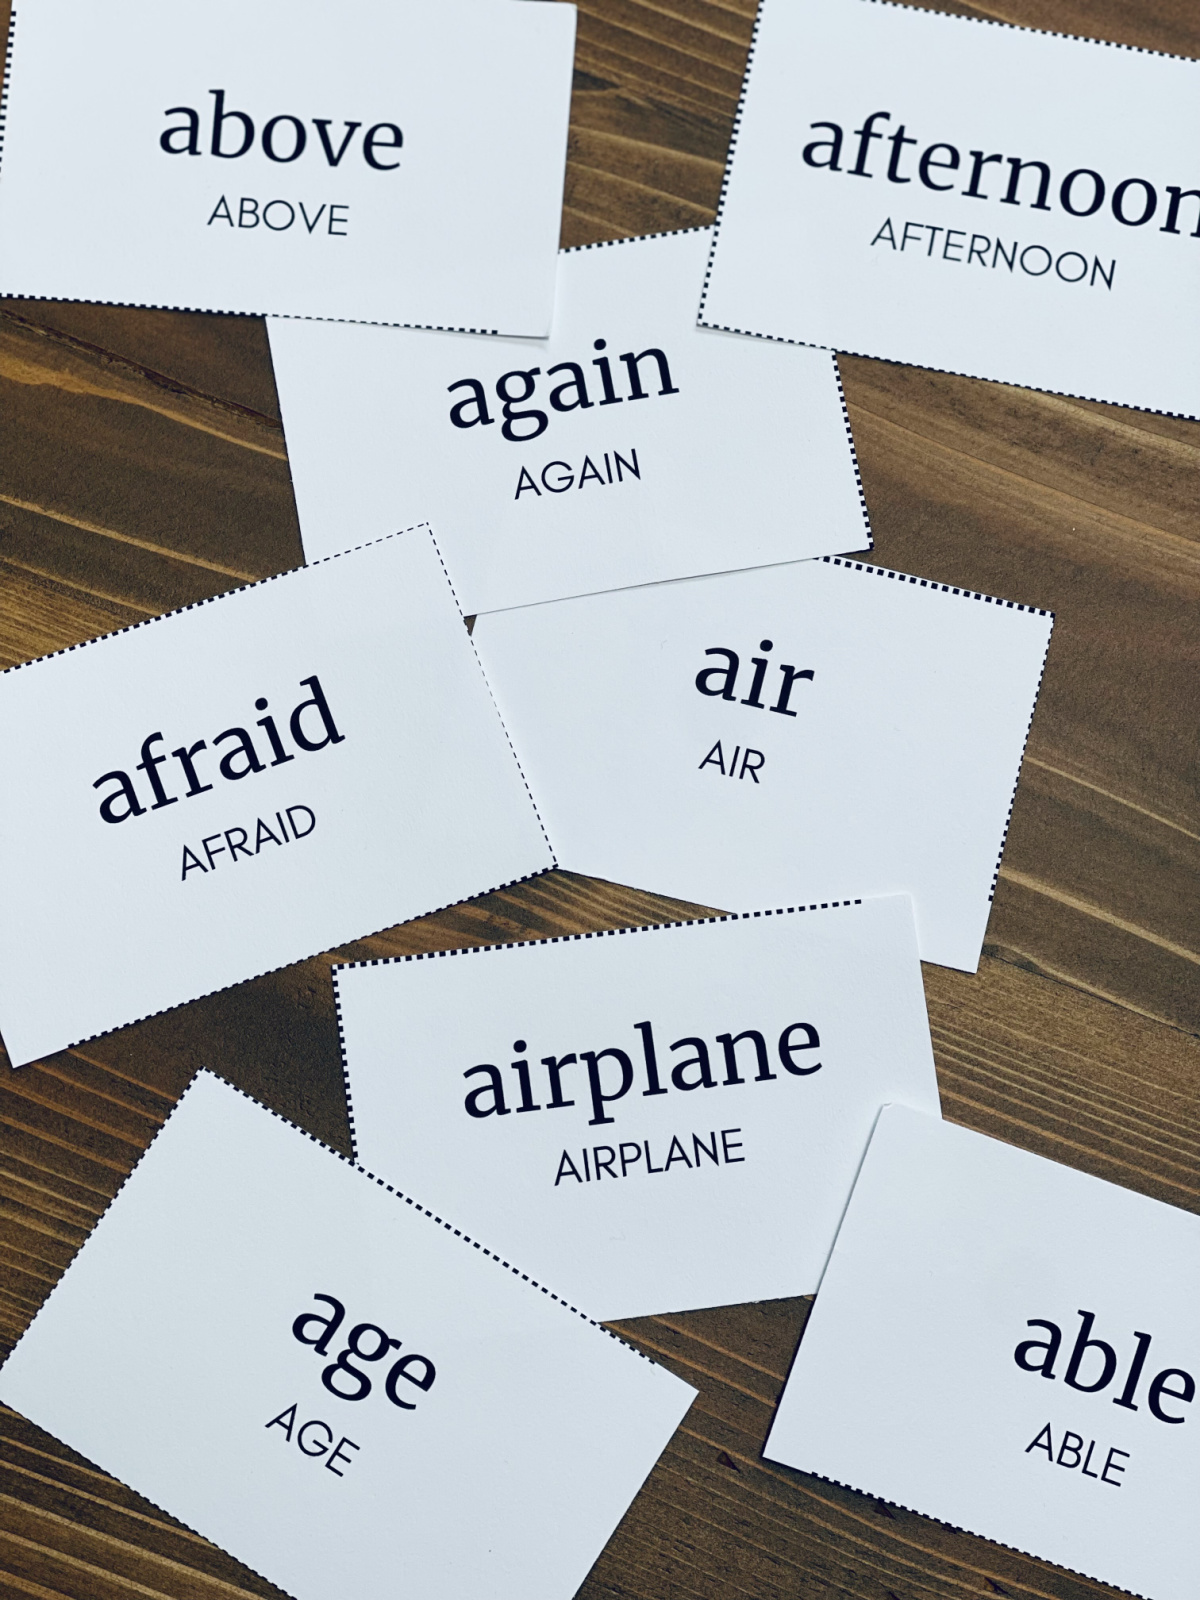 spelling flash cards with "A" words, like again and afraid.